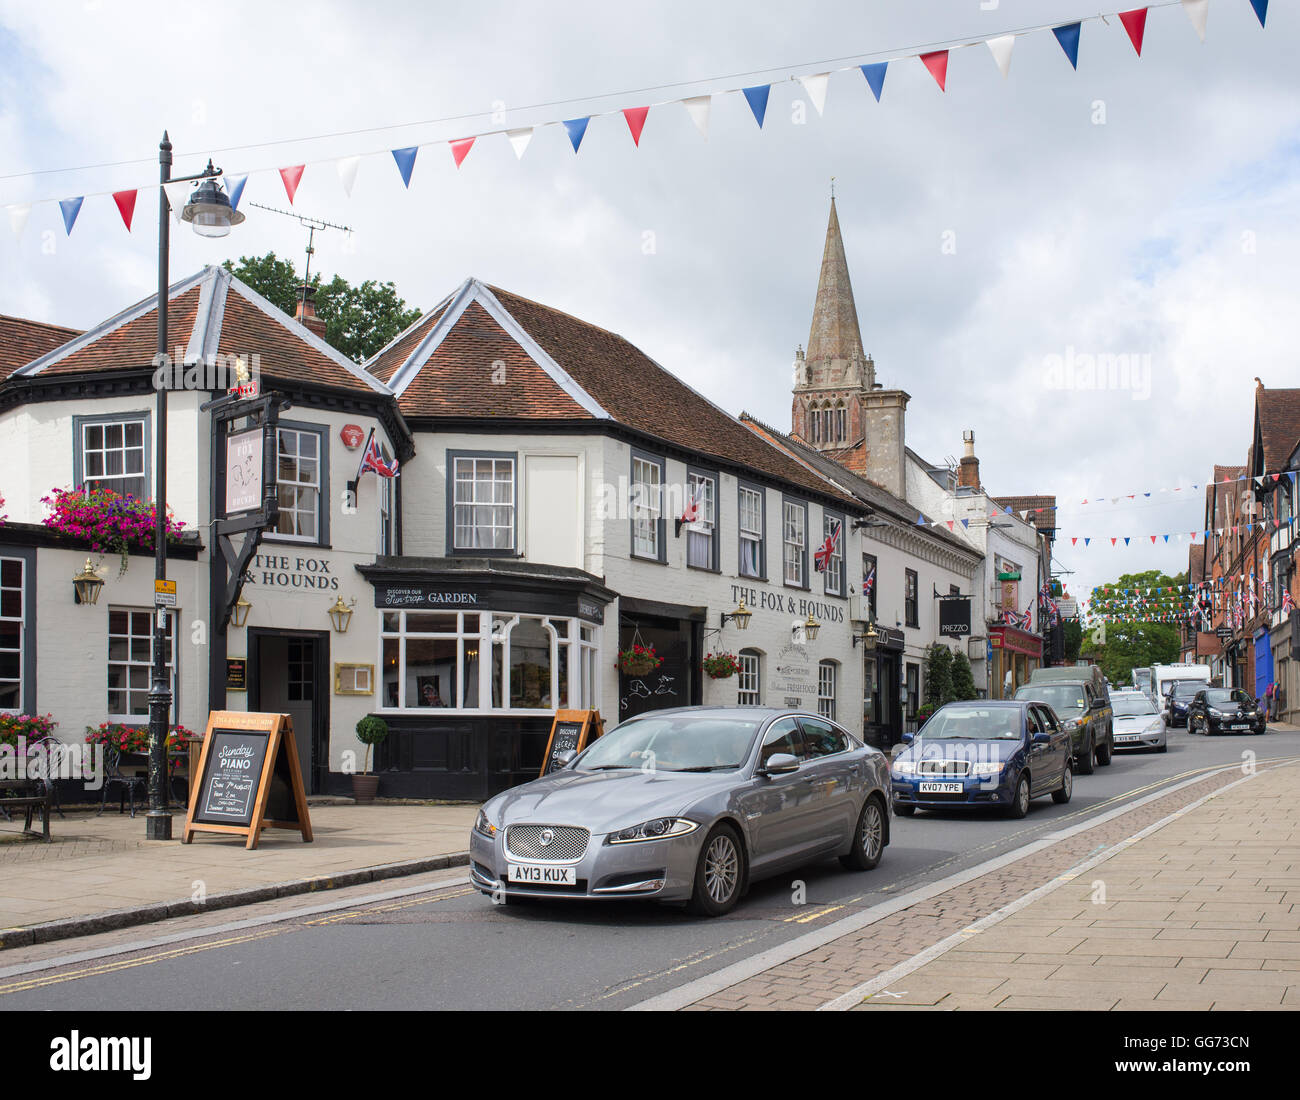 The main street through the New Forest town of Lyndhurst, Hampshire, UK is always a busy one. Stock Photo